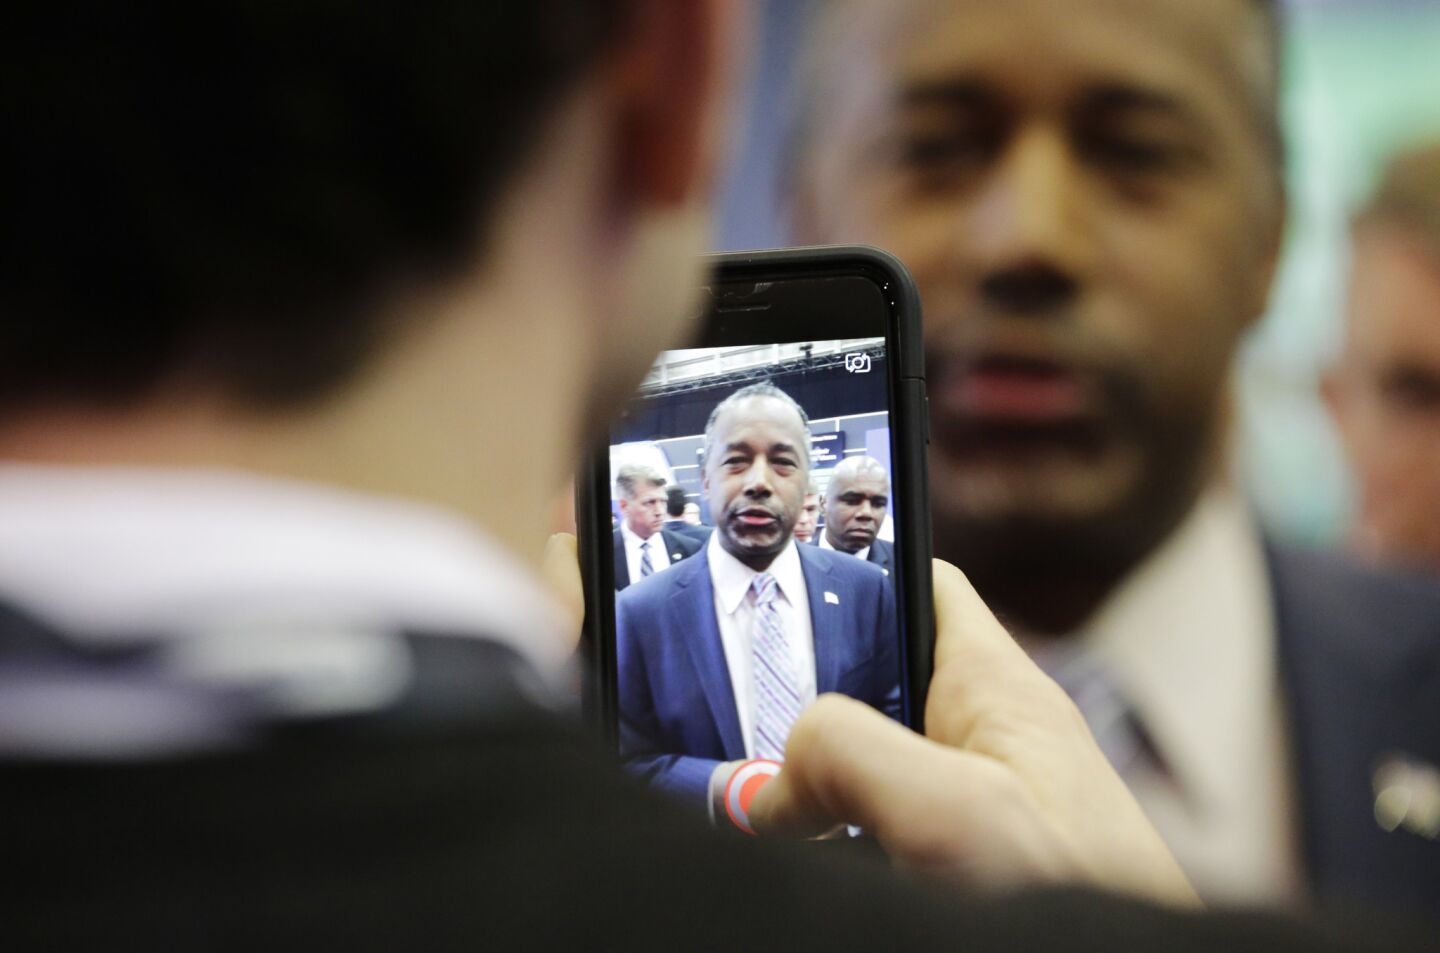 Ben Carson meets with members of the news media before the debate.